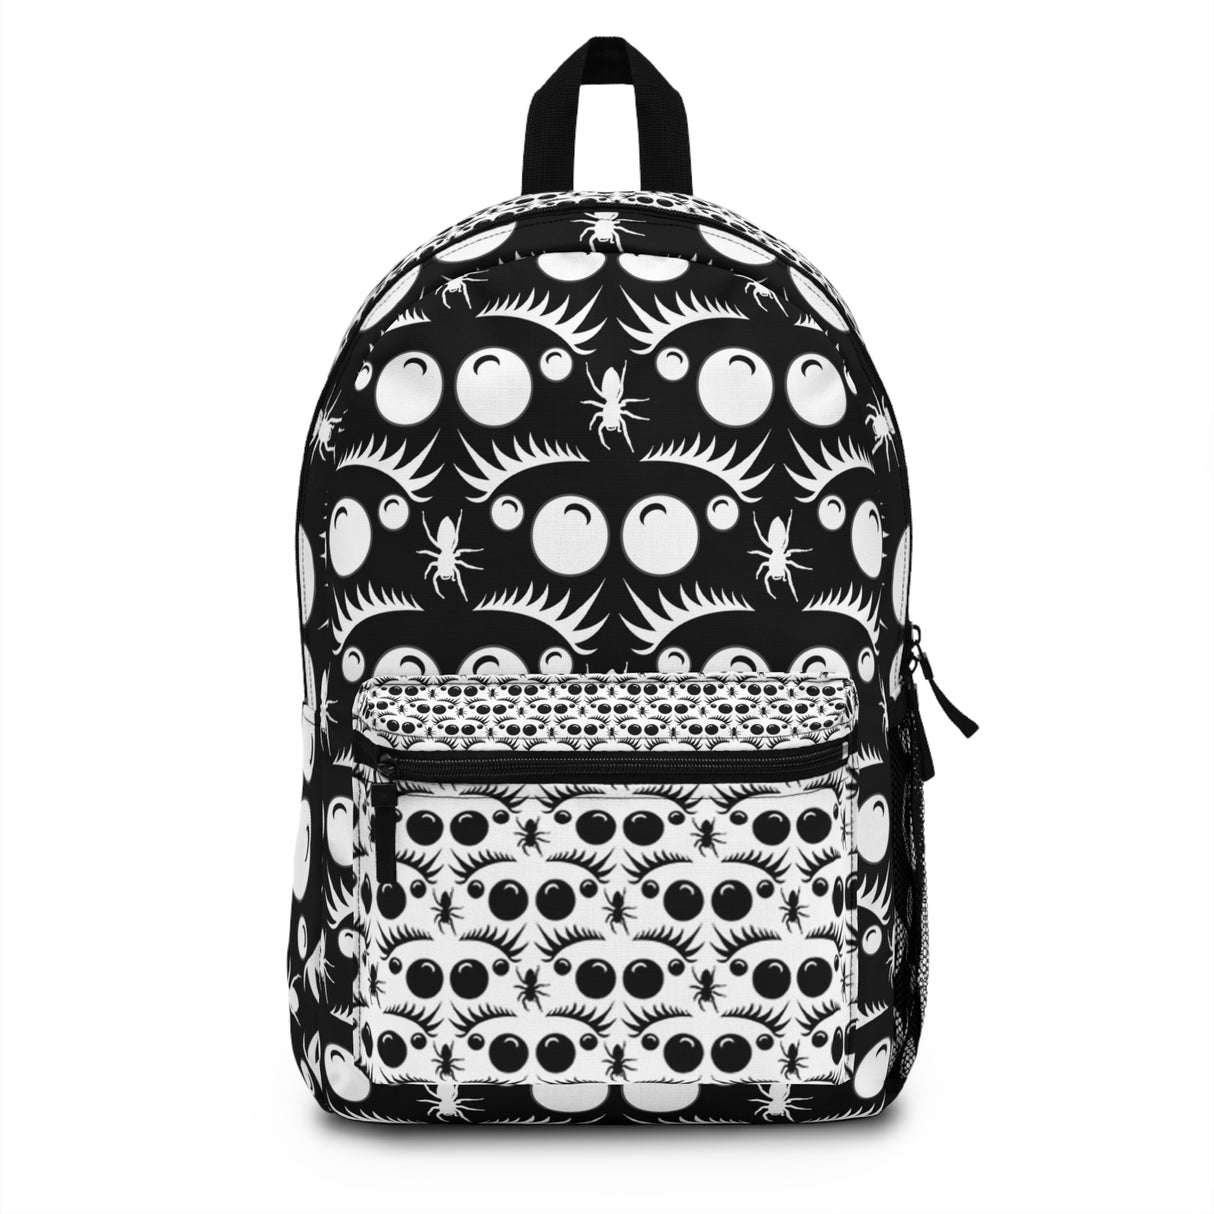 Backpack with Jumping Spider Spider Eyes Print